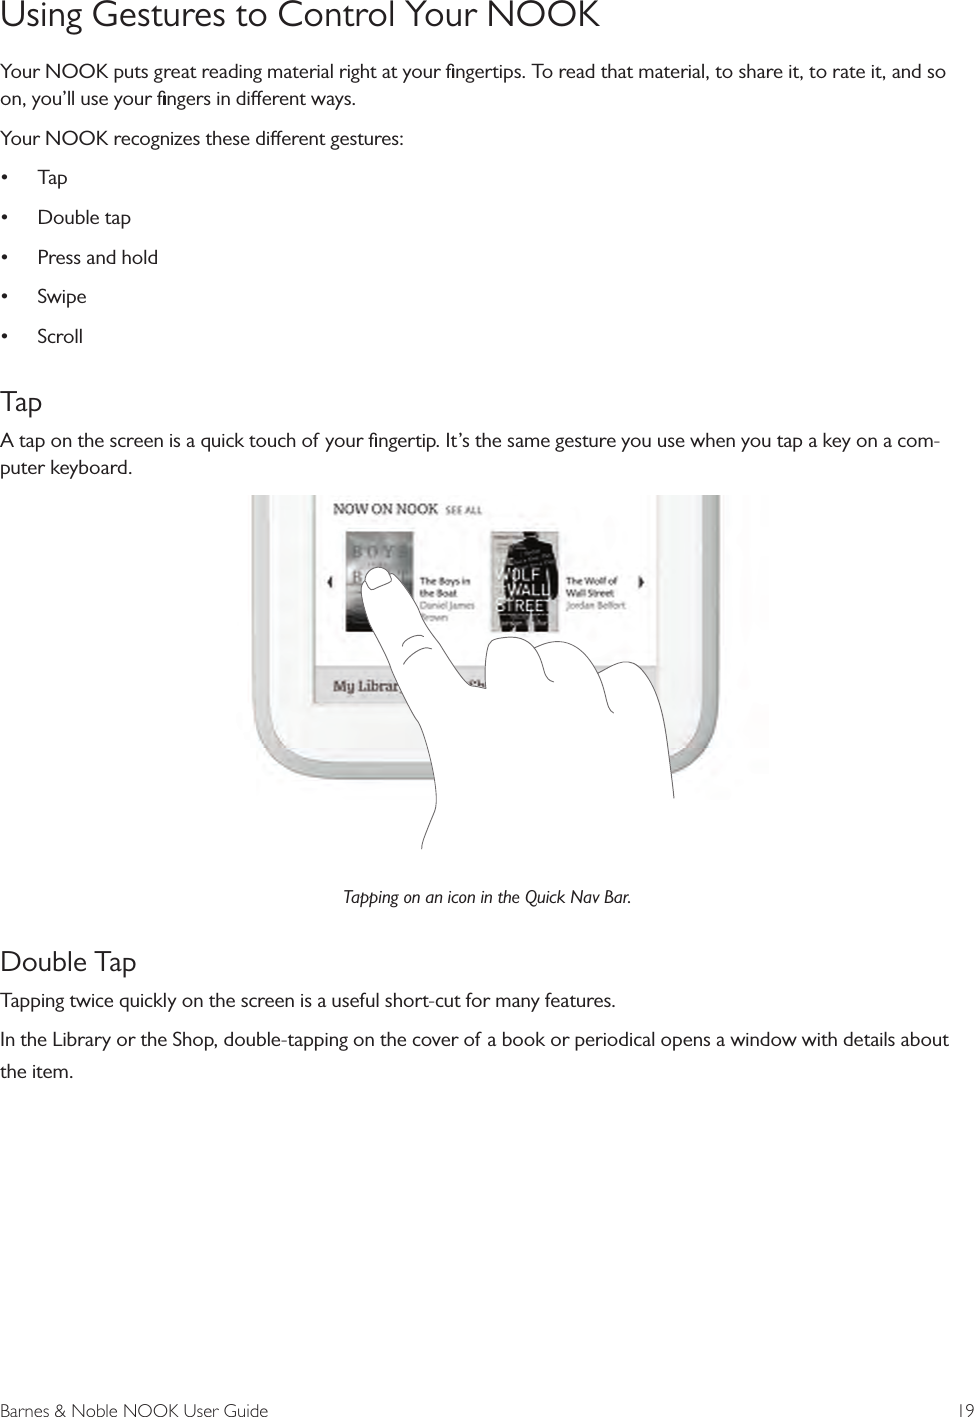 Barnes &amp; Noble NOOK User Guide  19Using Gestures to Control Your NOOKYour NOOK puts great reading material right at your ﬁngertips. To read that material, to share it, to rate it, and so on, you’ll use your ﬁngers in dierent ways.Your NOOK recognizes these dierent gestures:• Tap• Double tap• Press and hold• Swipe• ScrollTapA tap on the screen is a quick touch of your ﬁngertip. It’s the same gesture you use when you tap a key on a com-puter keyboard. Tapping on an icon in the Quick Nav Bar.Double TapTapping twice quickly on the screen is a useful short-cut for many features.In the Library or the Shop, double-tapping on the cover of a book or periodical opens a window with details about the item. 